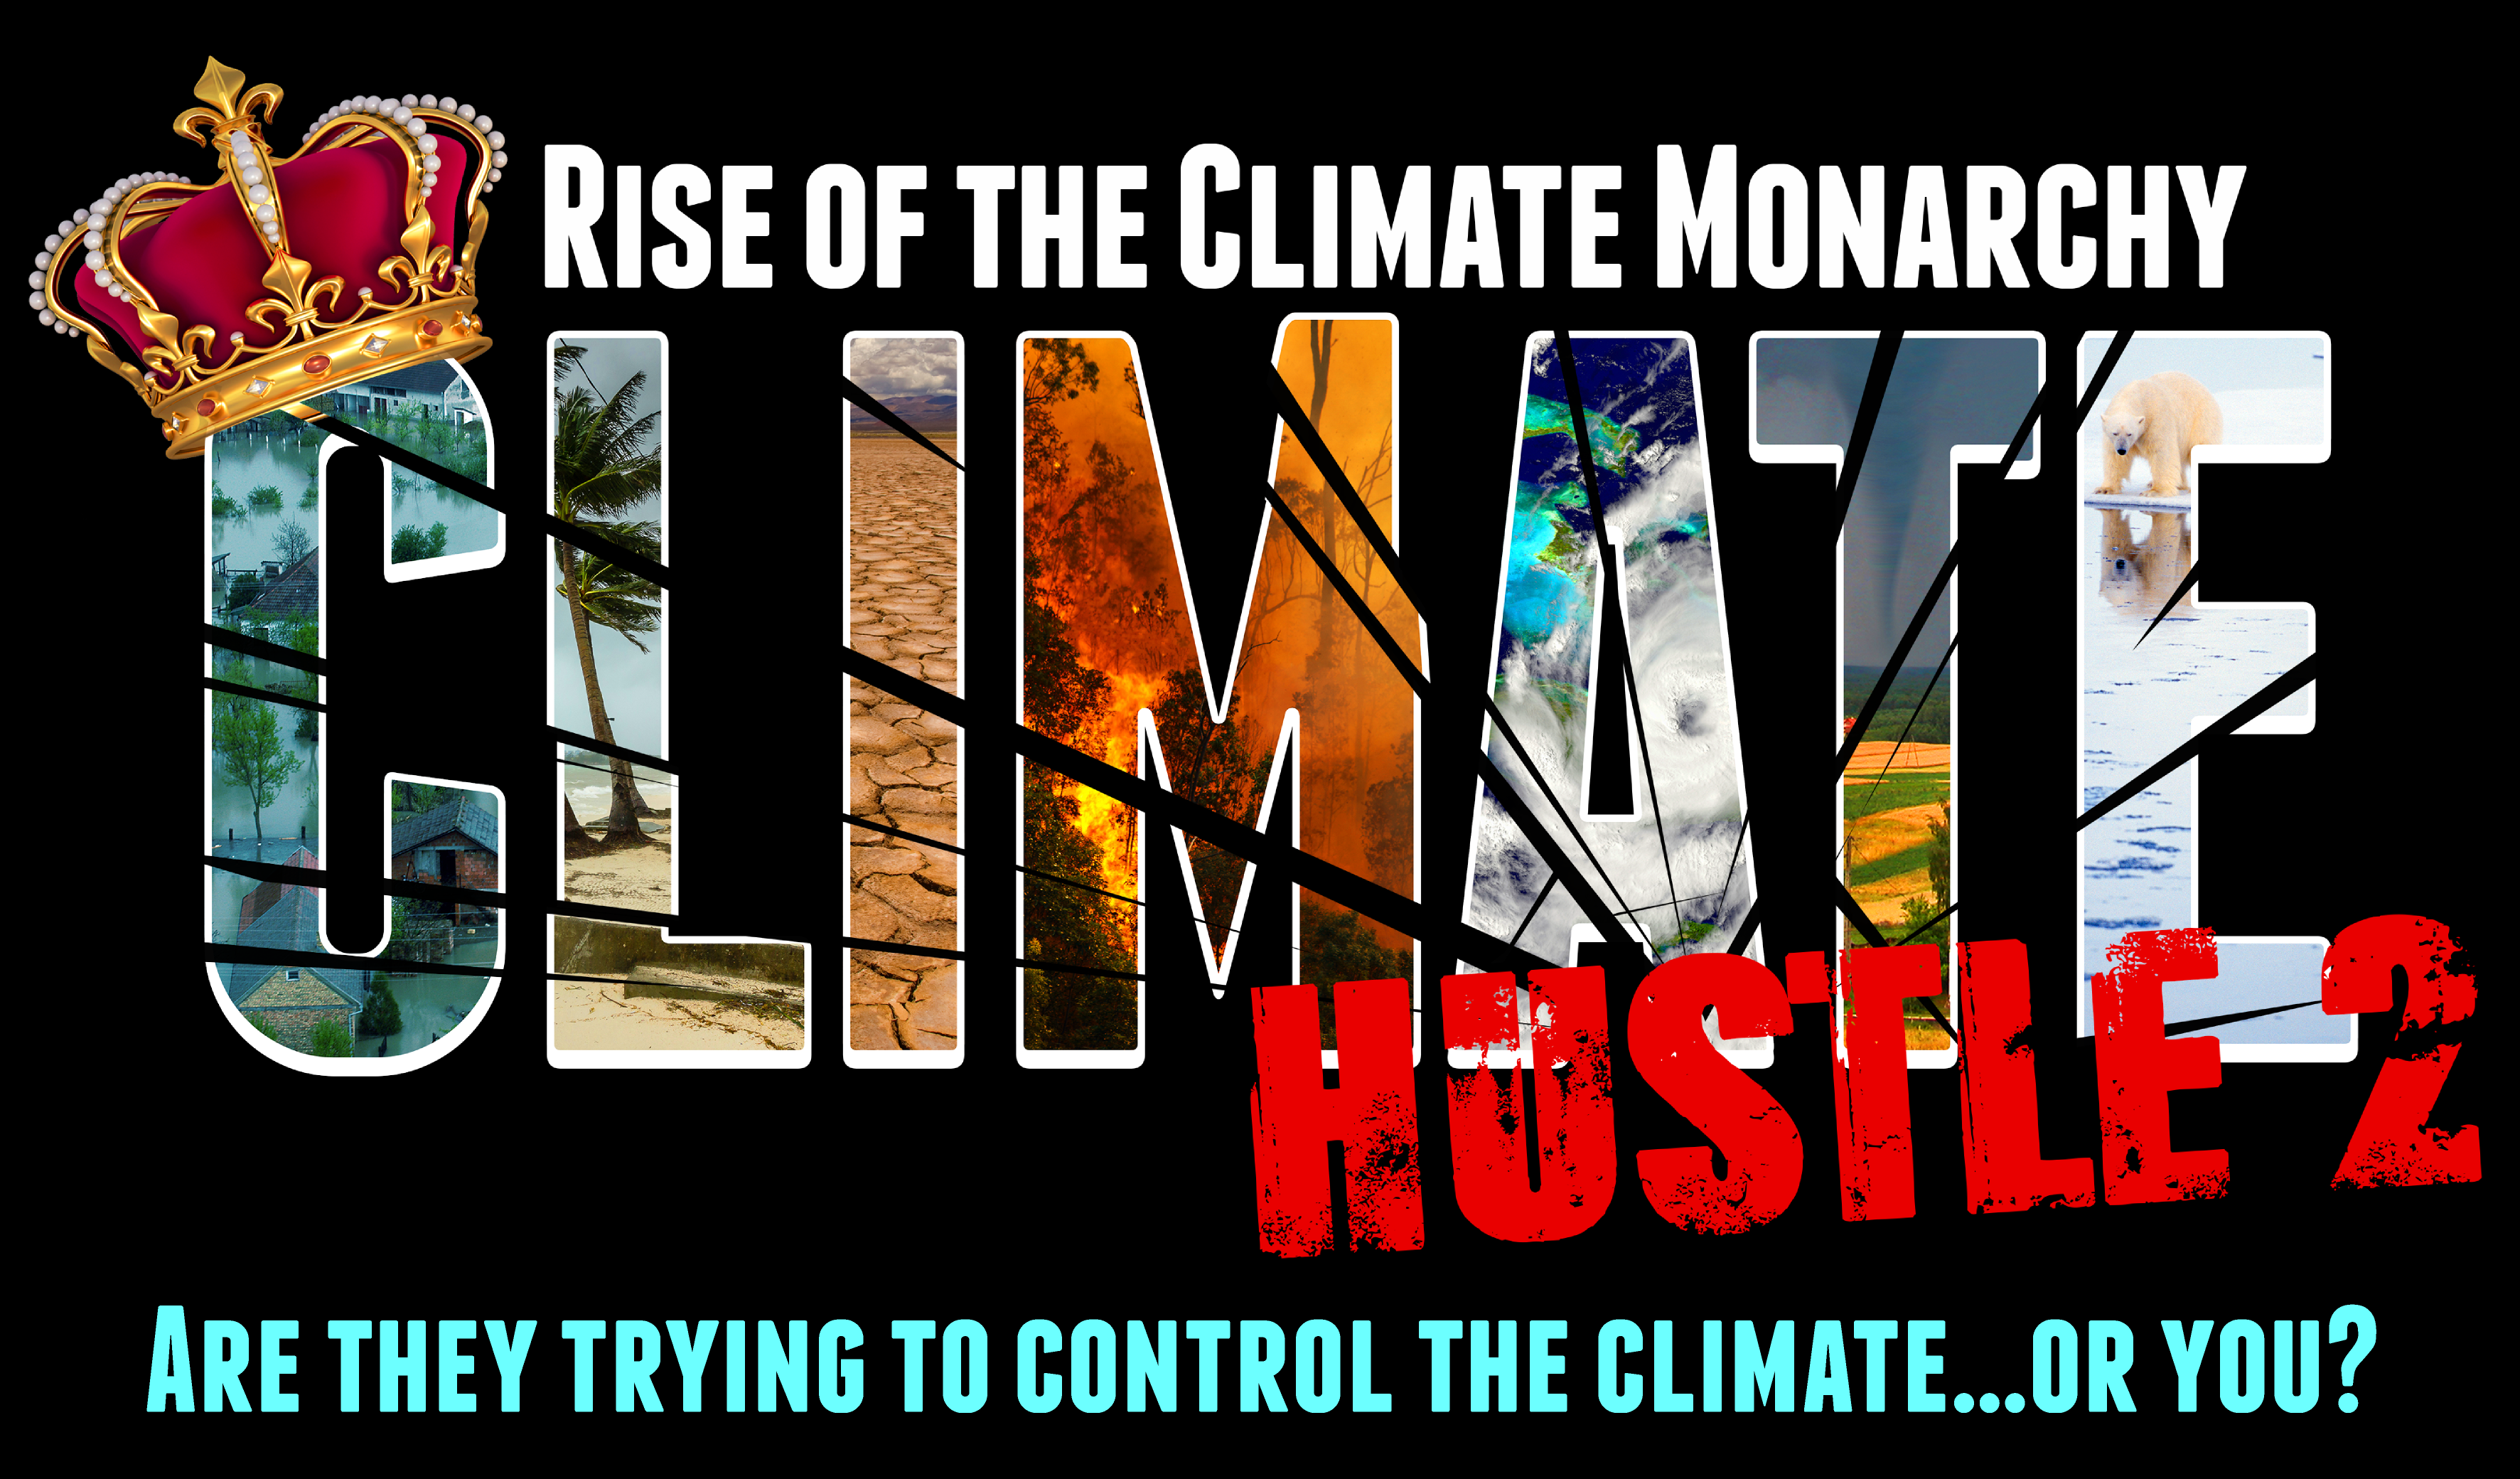 Climate Hustle 2: Rise of the Climate Monarchy